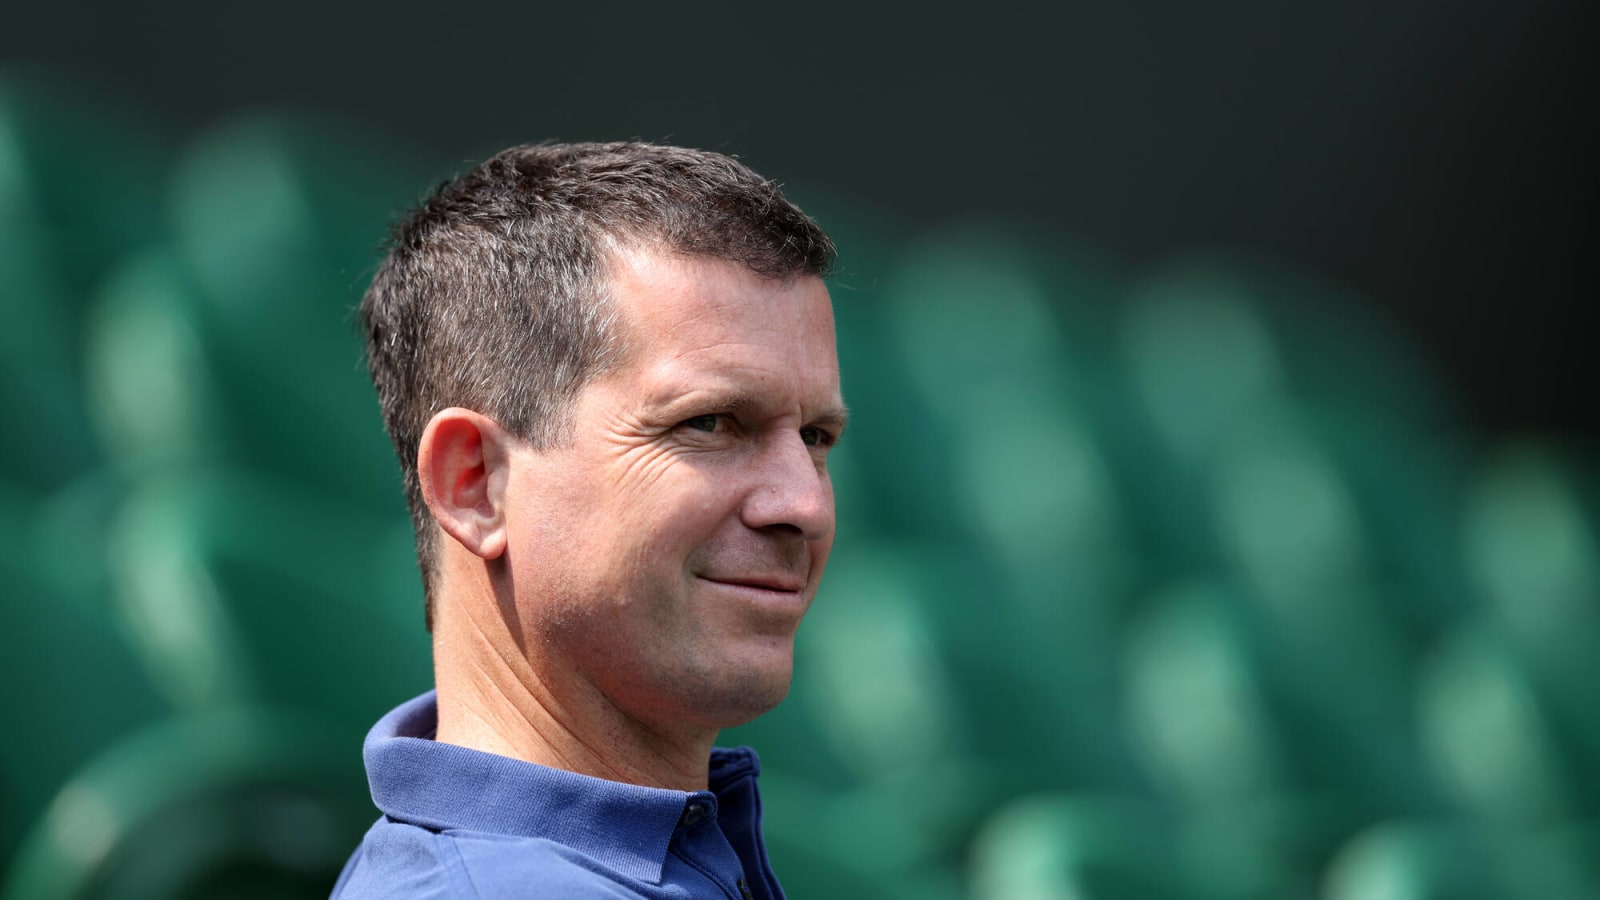 Tim Henman criticizes Australian Open’s bizarre scheduling with matches finishing way past midnight